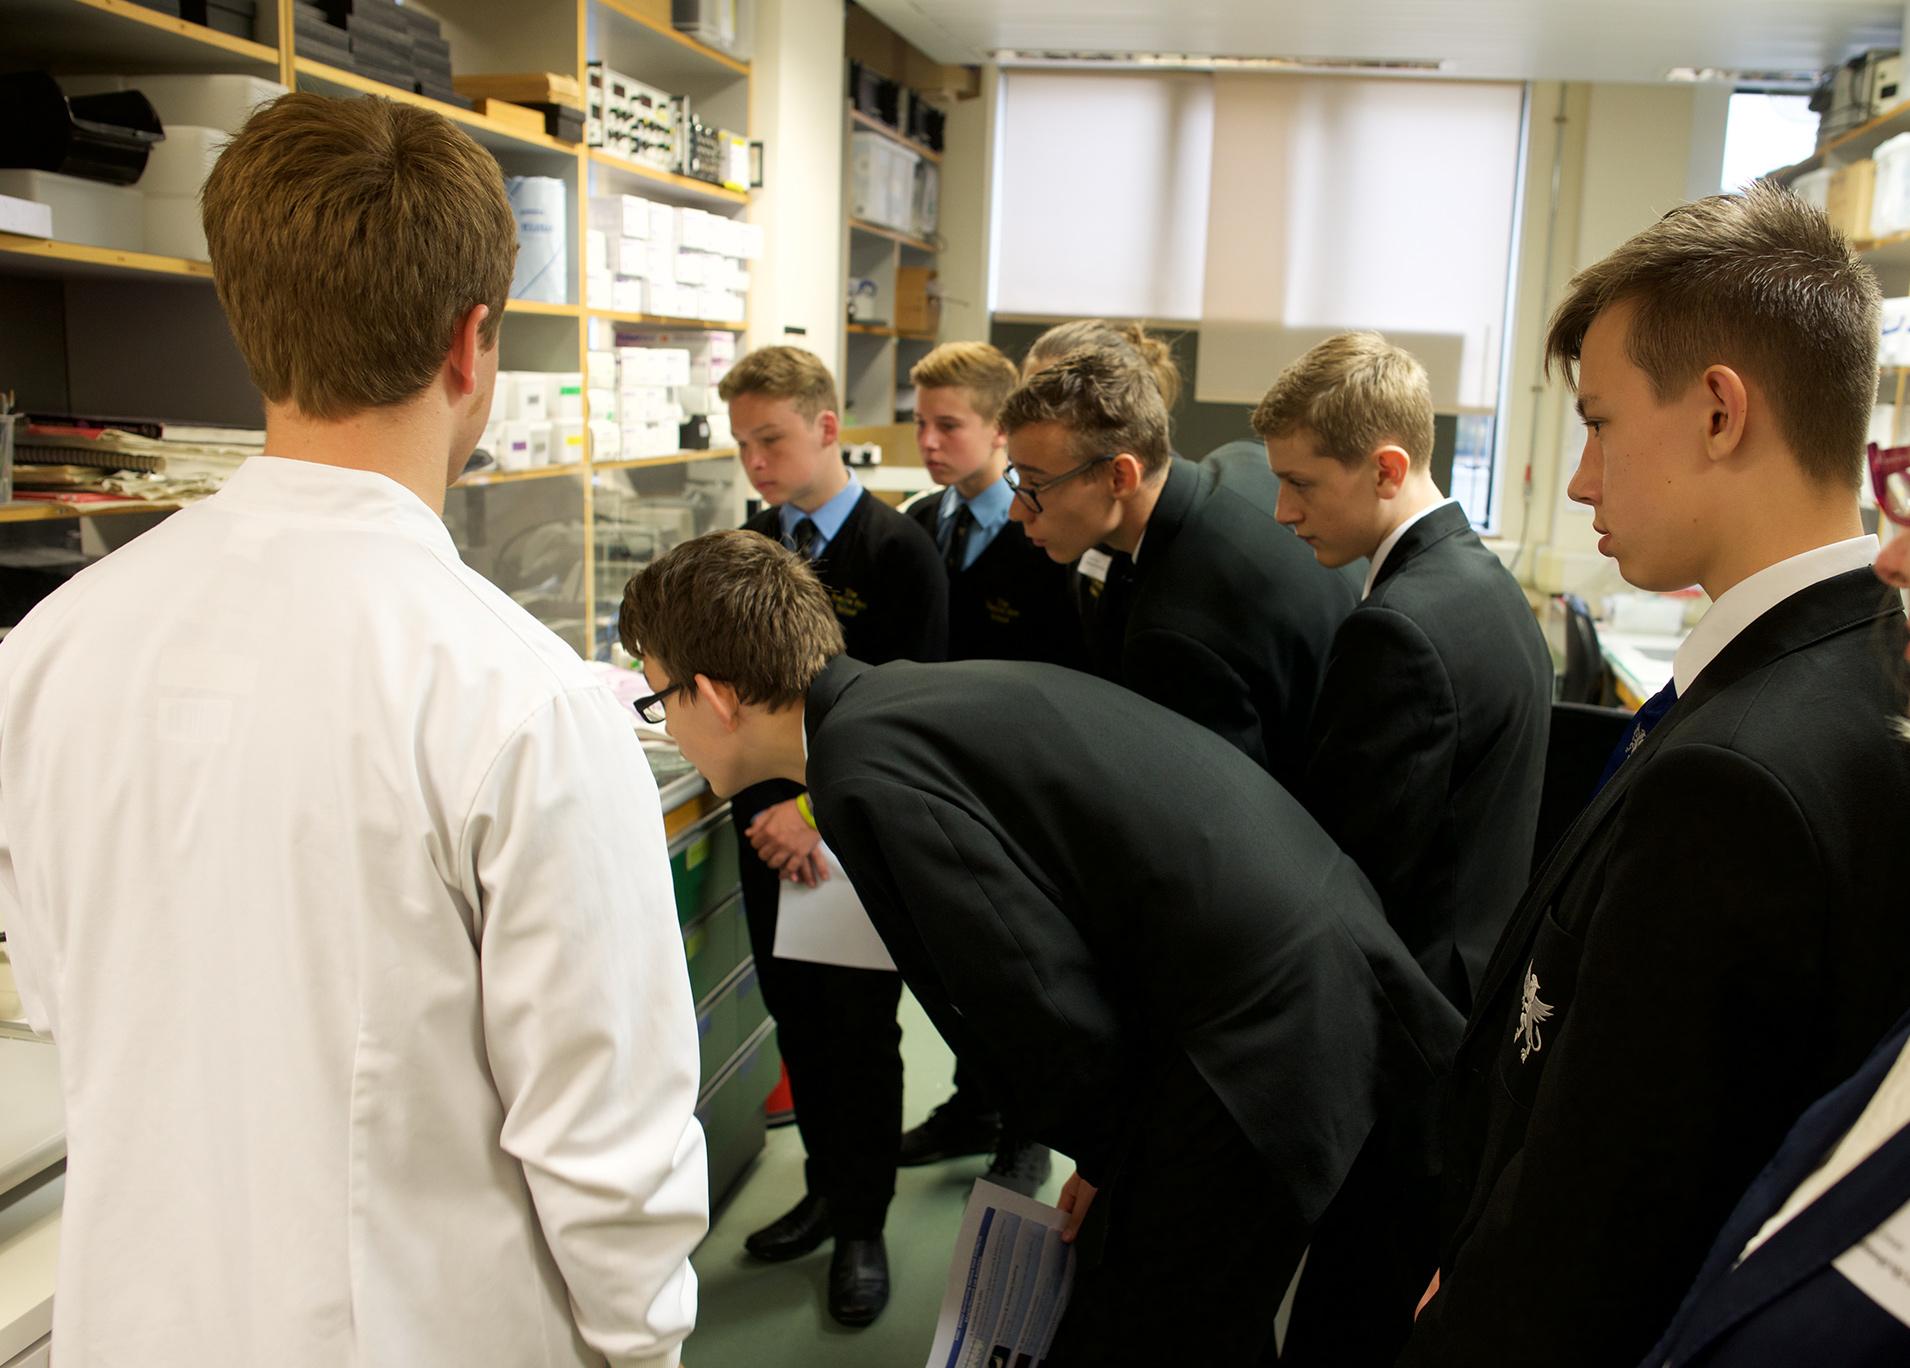 Pupils visited real working labs, where they could see for themselves some of the methods and technologies used in the Unit’s research.